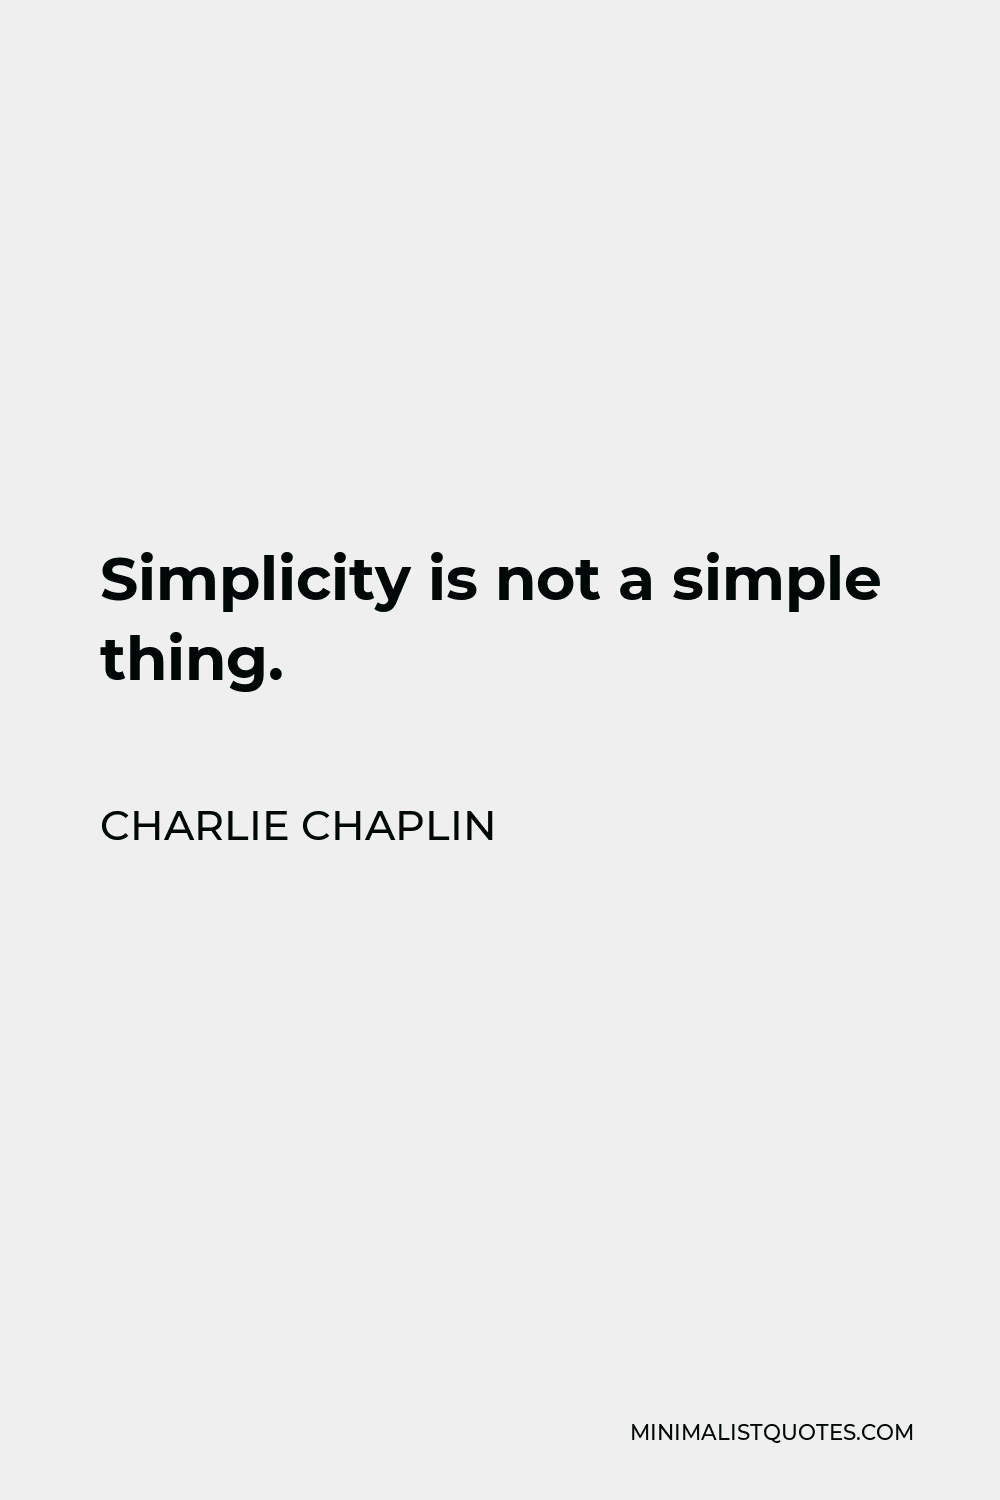 Charlie Chaplin Quote - Simplicity is not a simple thing.